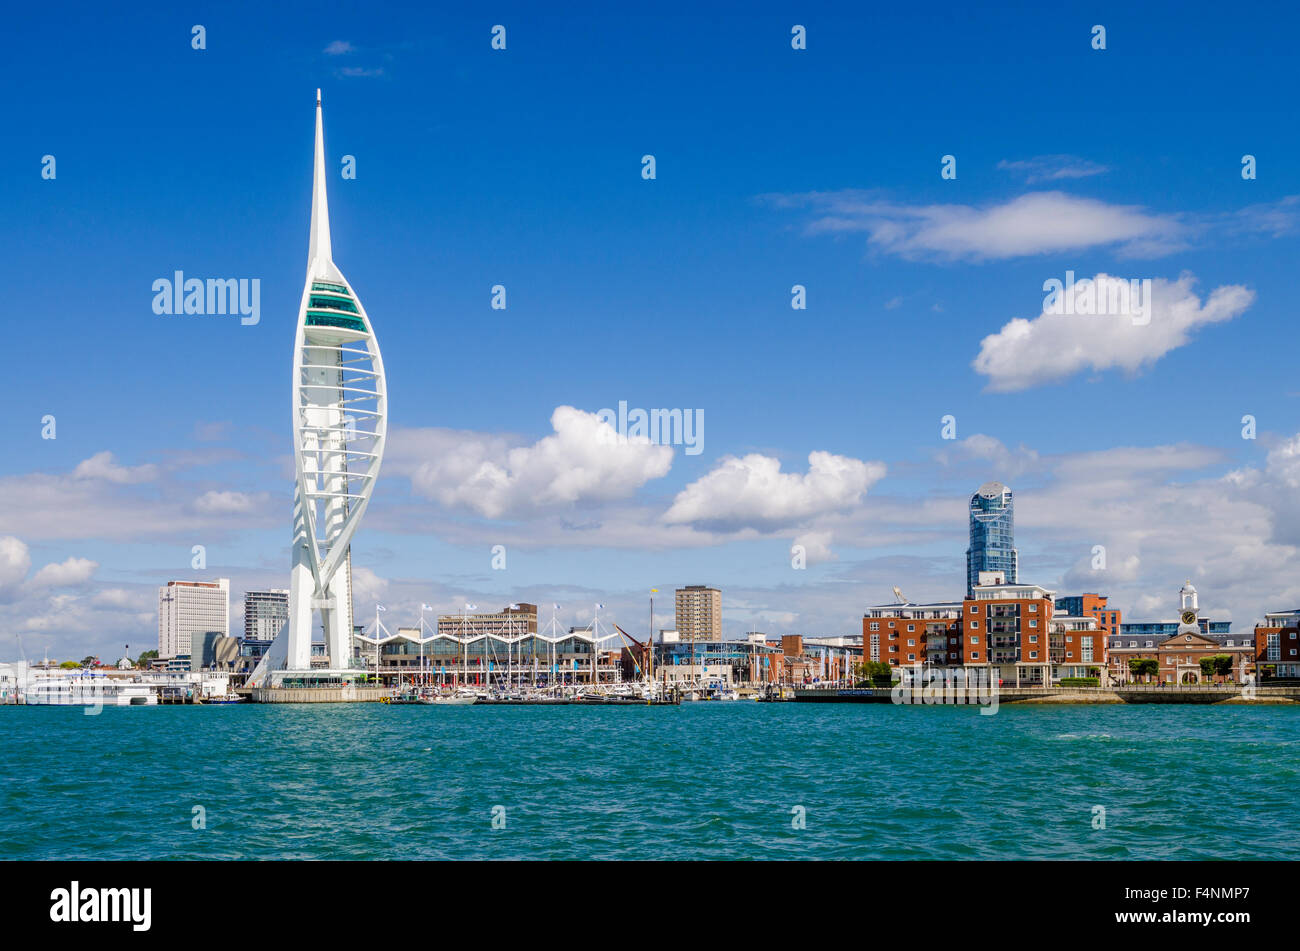 Spinnaker Tower overlooking the Solent at Gunwharf Quays, Portsmouth Harbour, Hampshire, England. Stock Photo